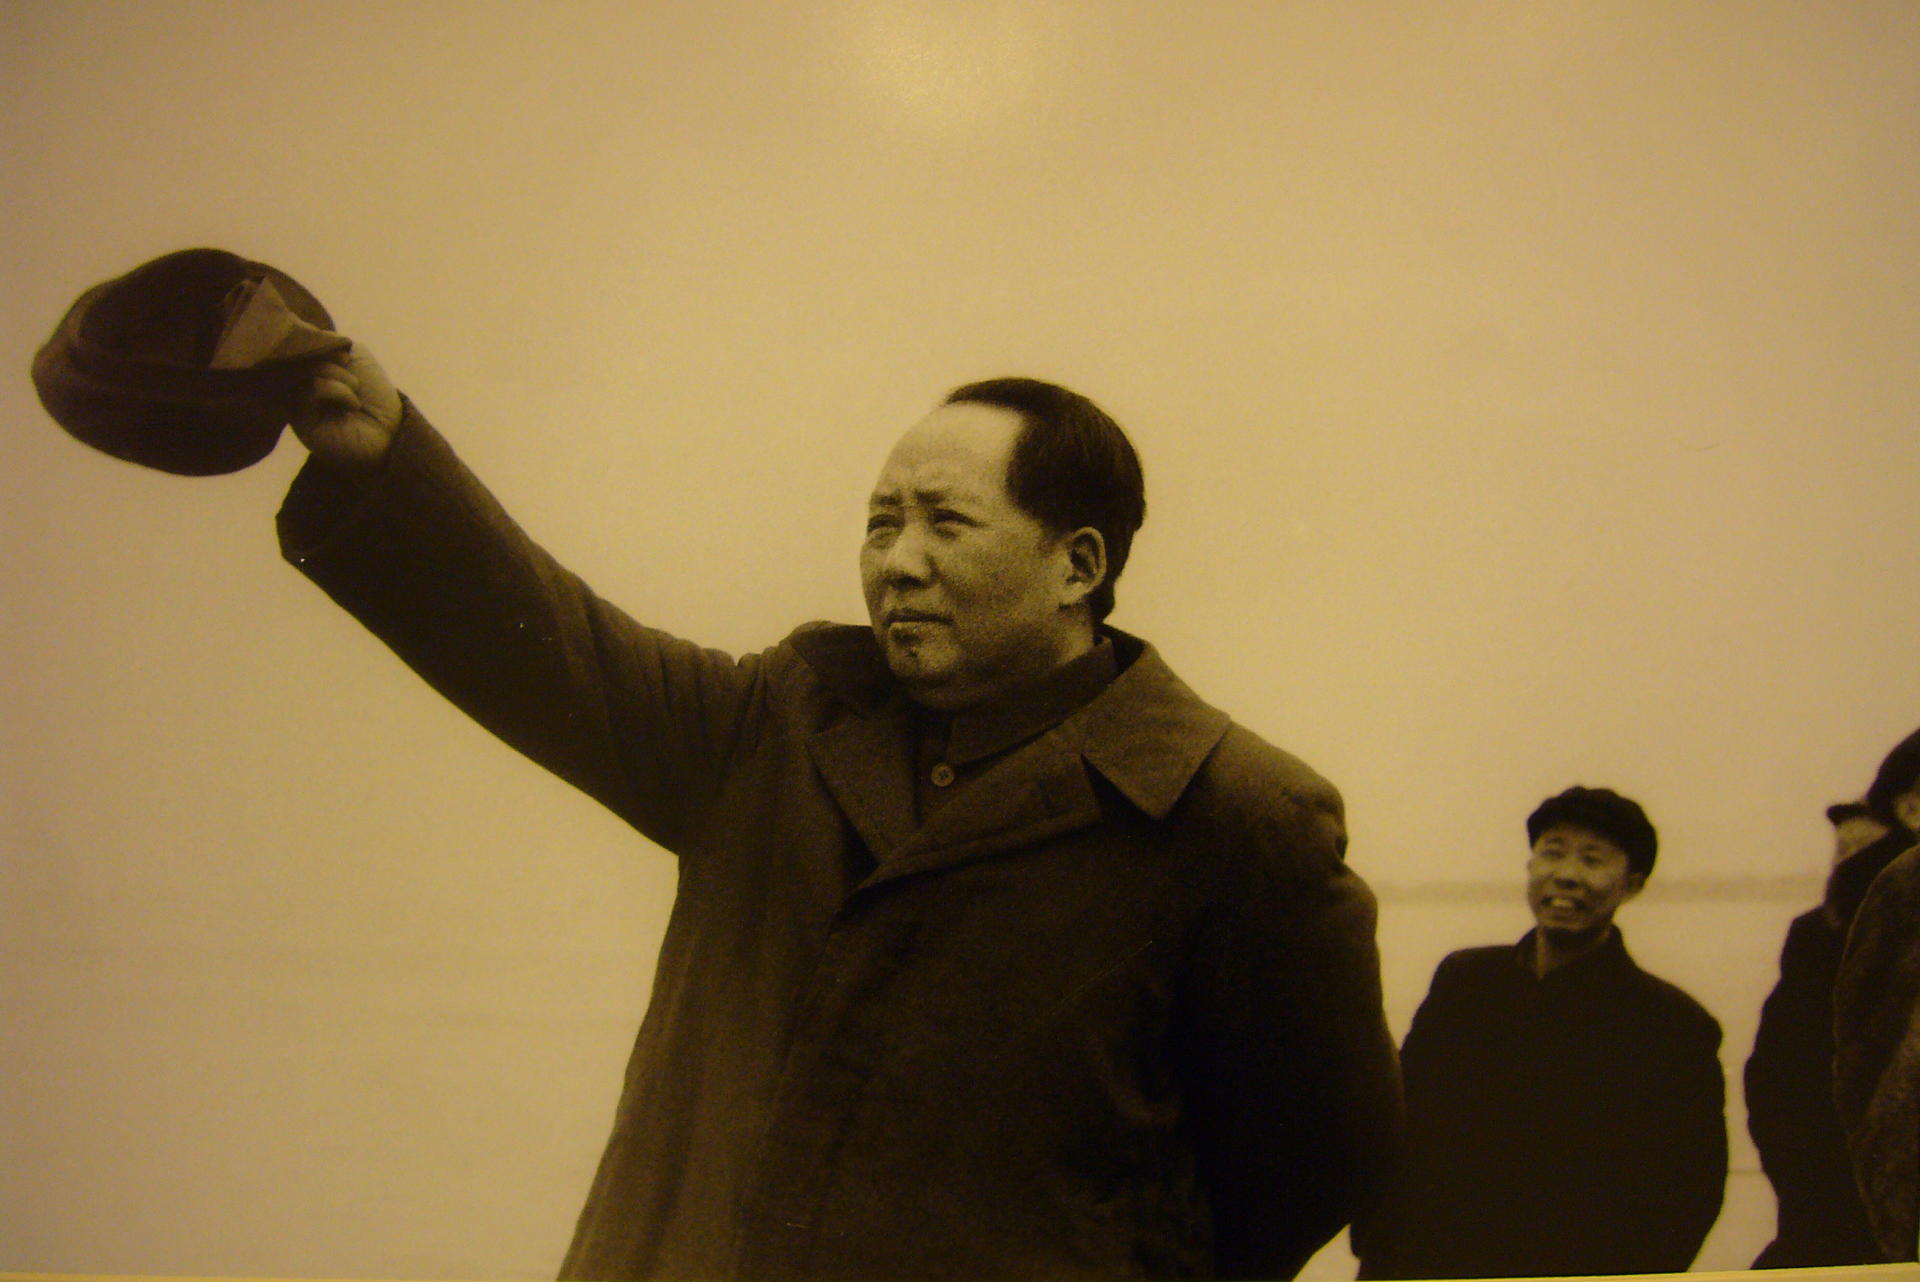 Mao Zedong in 1953, the year the first five-year plan began.